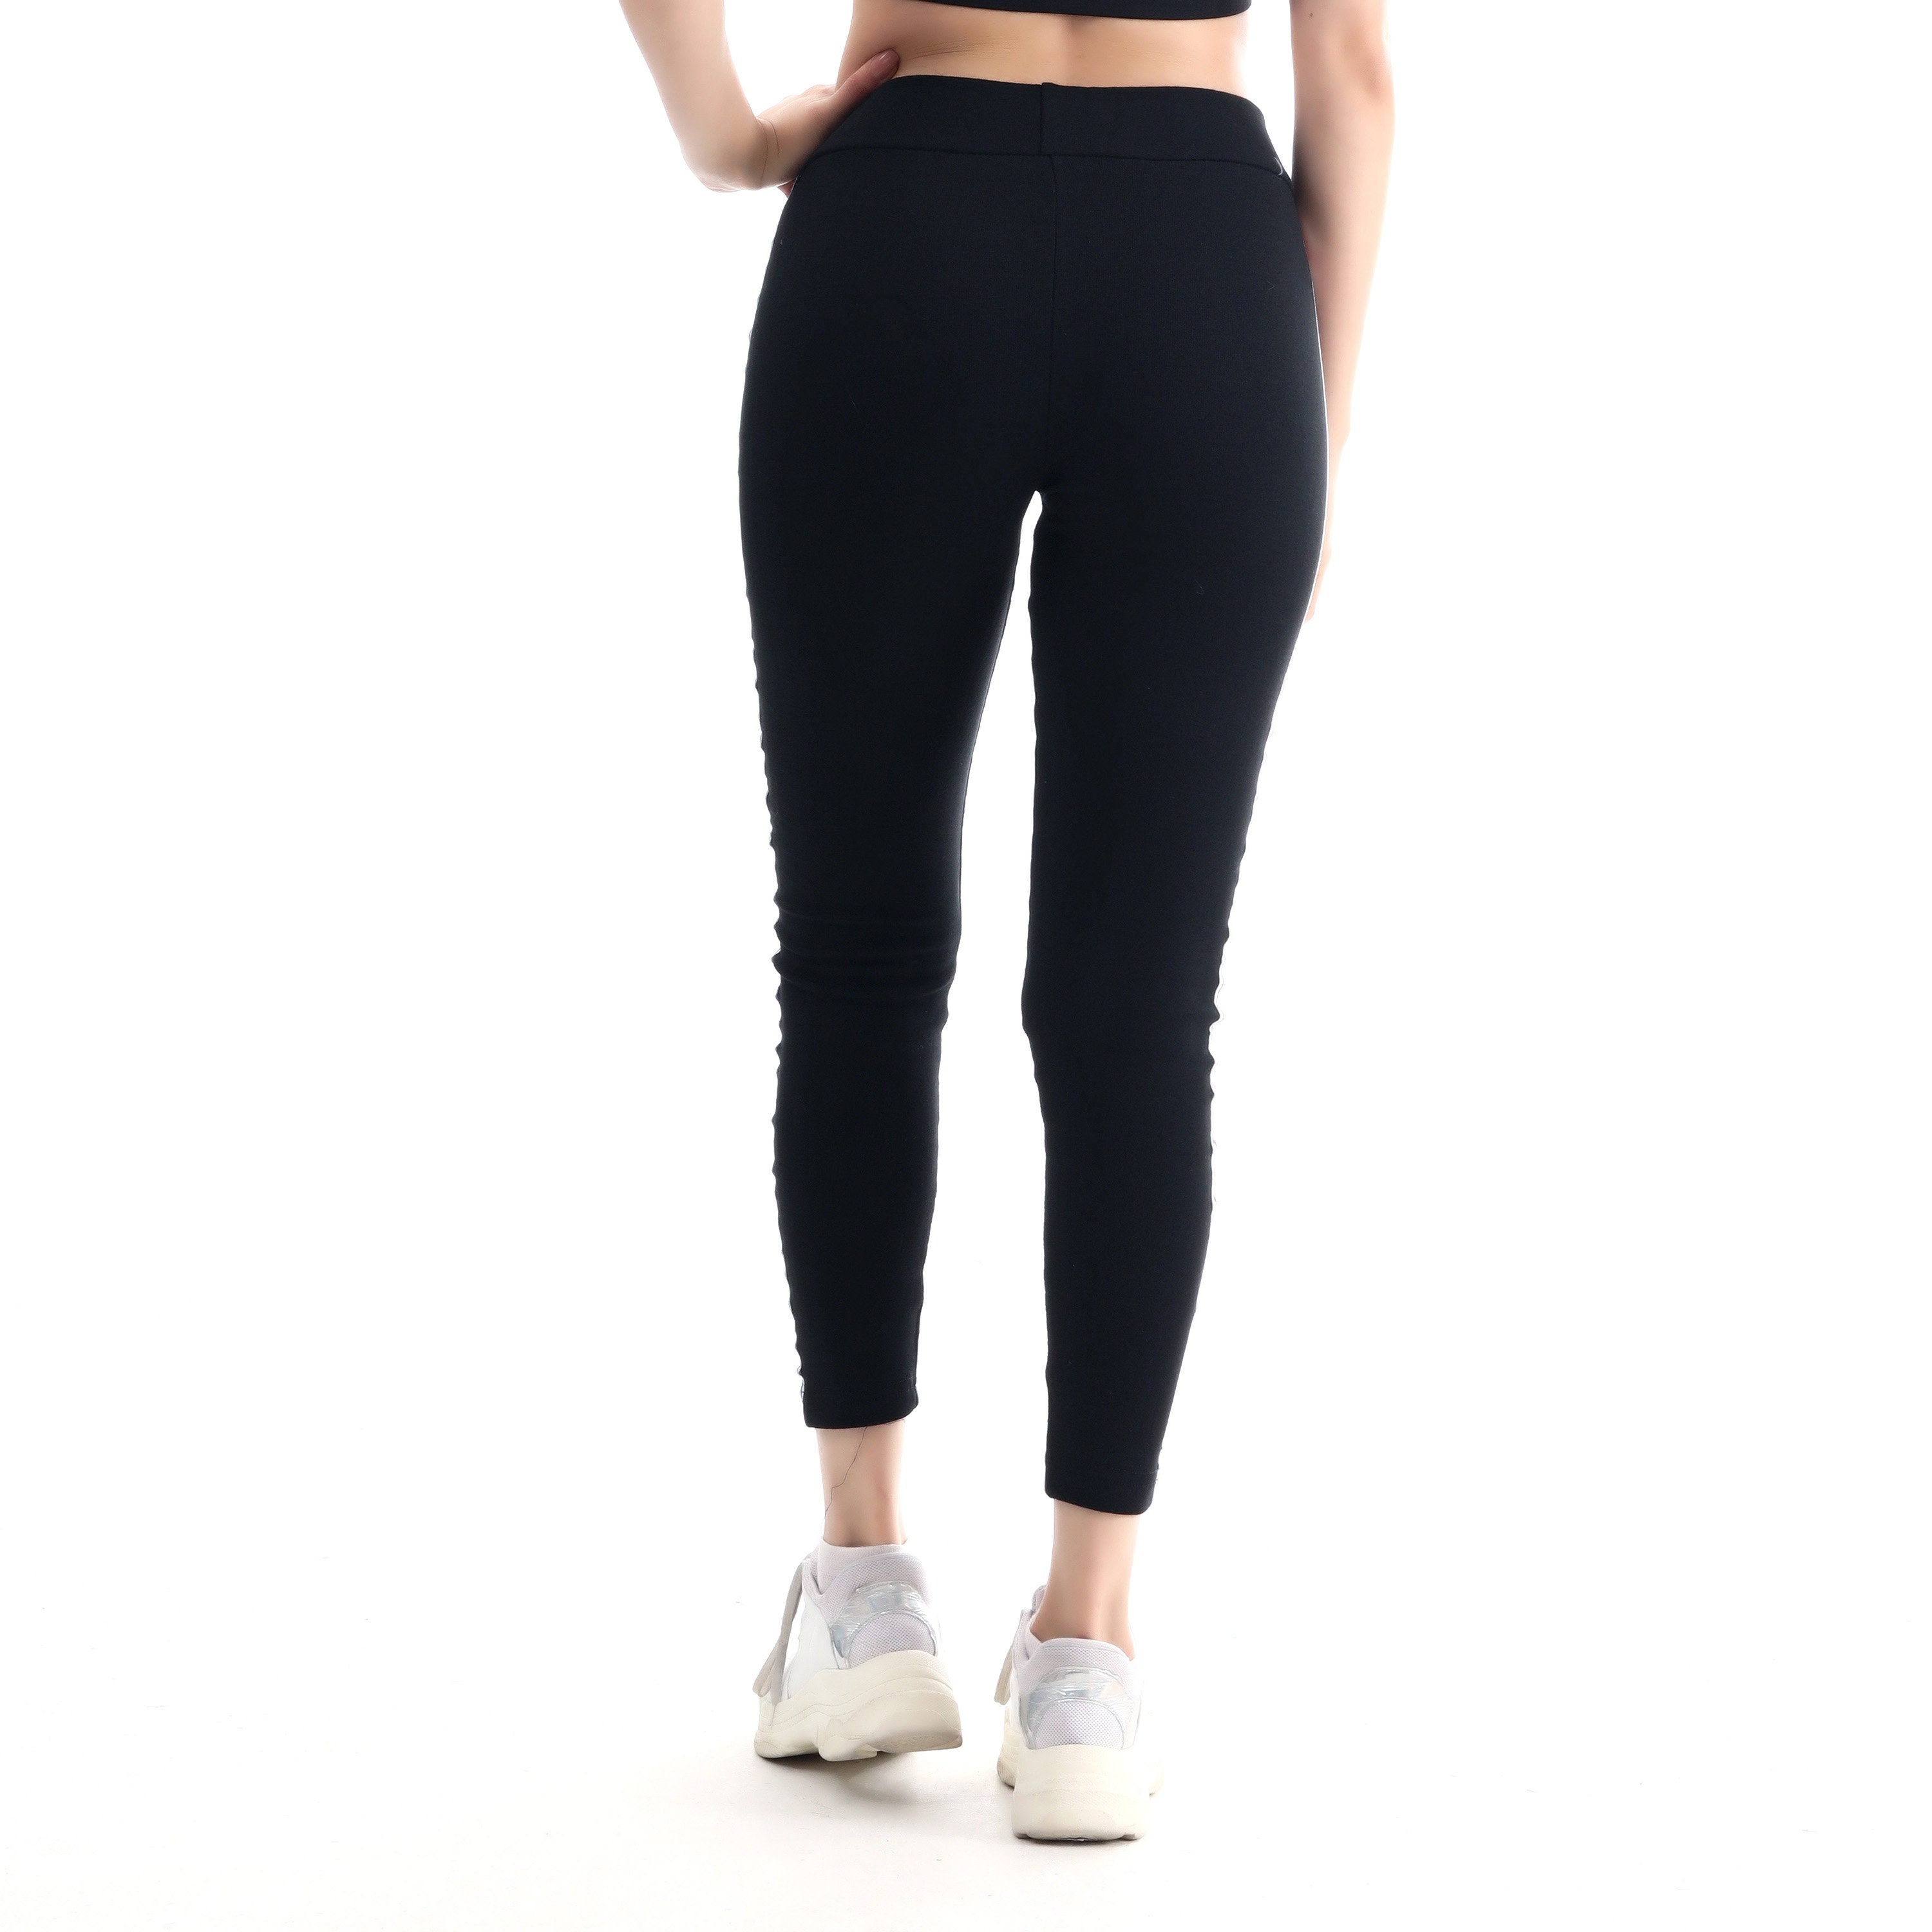 Black Yoga Leggings With Red Stripe, Winter Workout Pants for